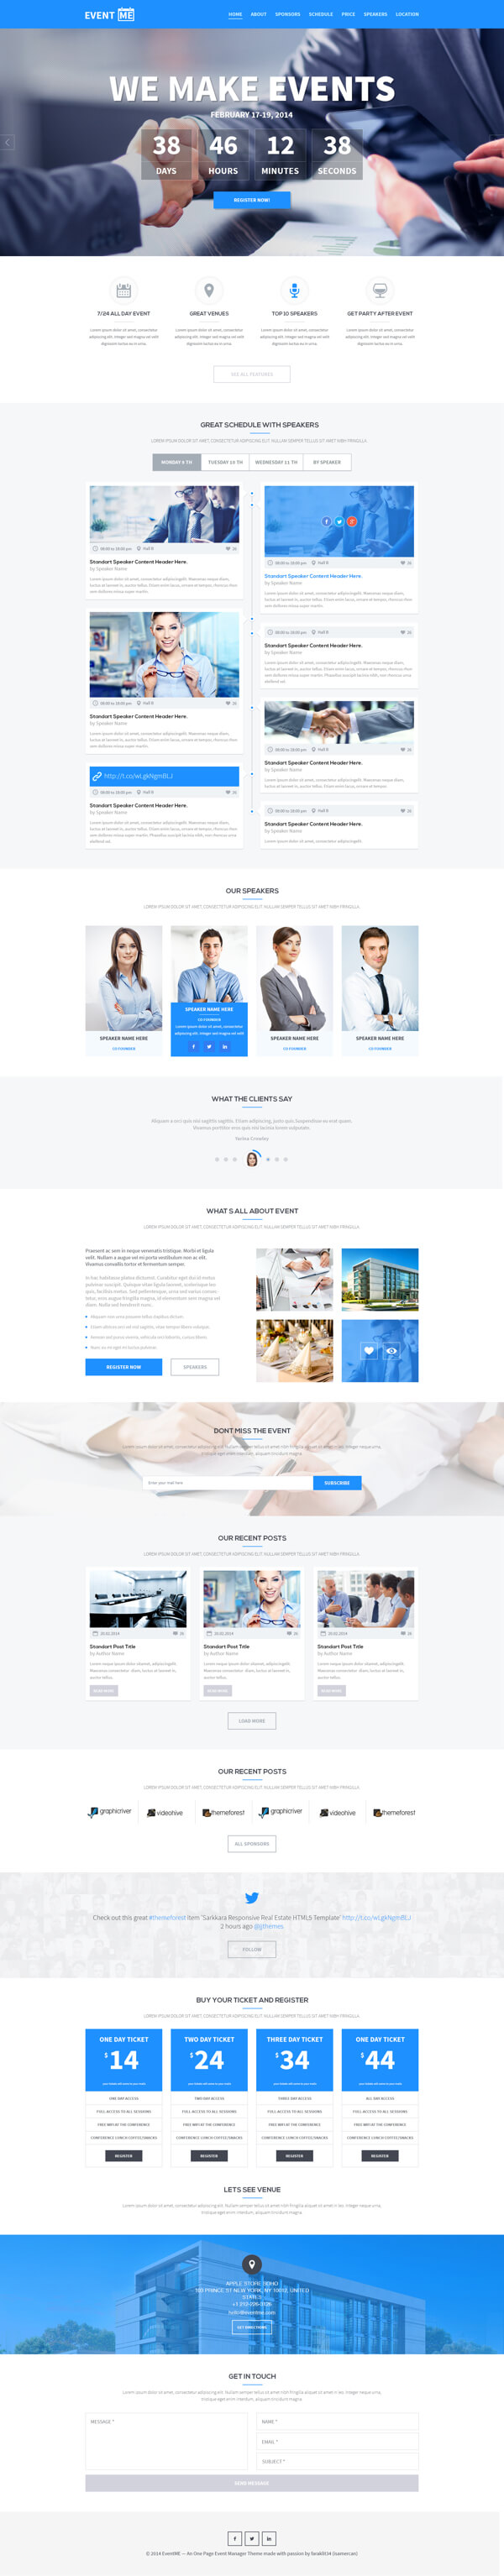 Psd Templates: 20 One Page Free Web Templates | Freebies With Single Page Brochure Templates Psd